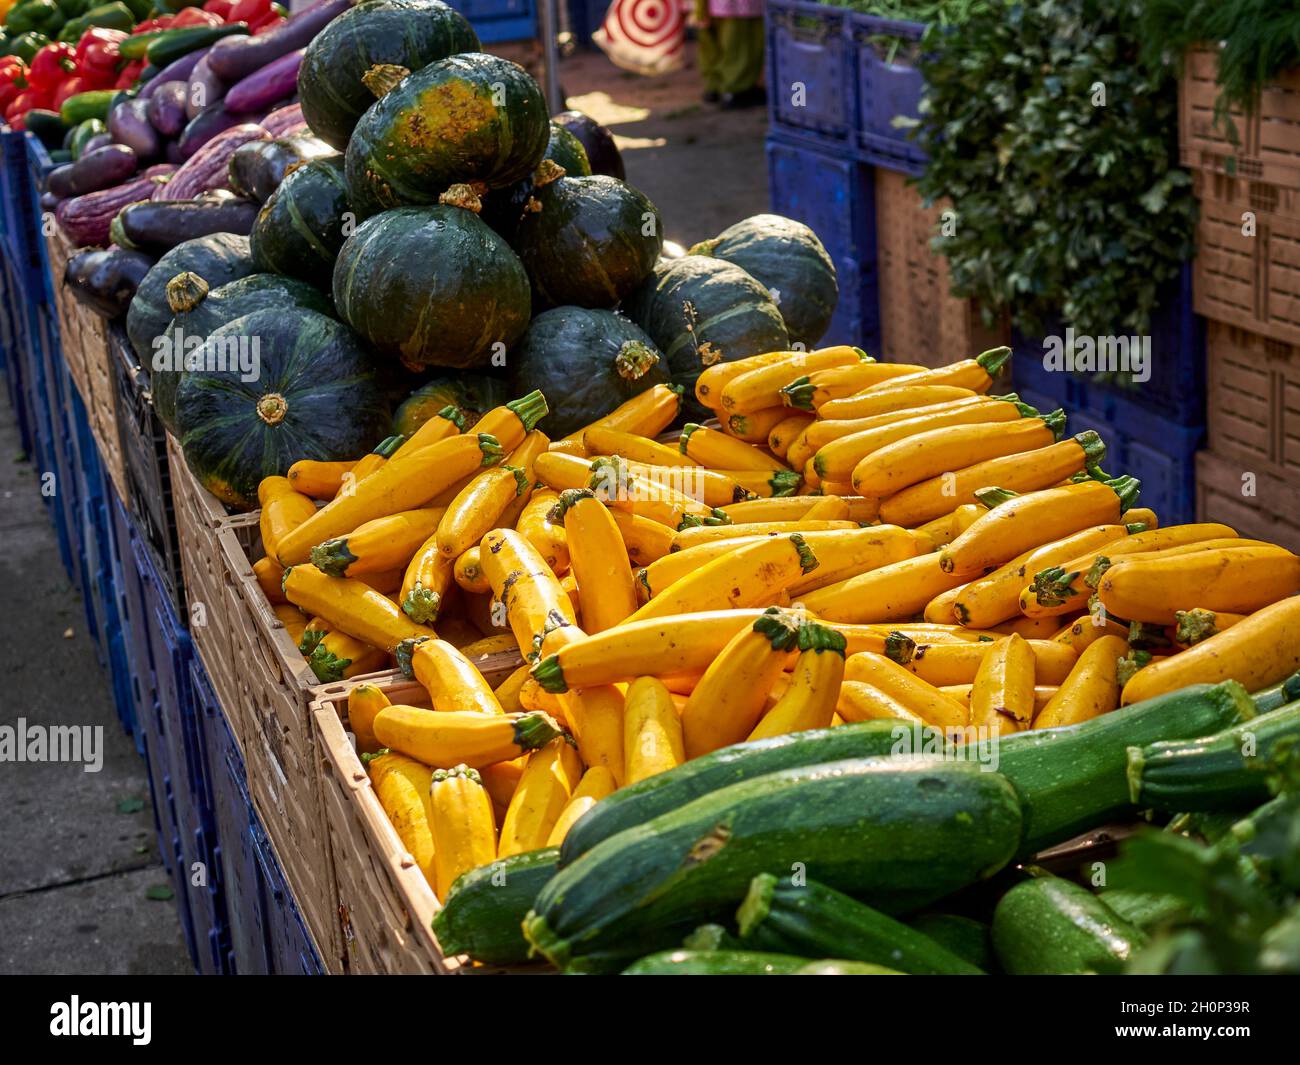 Summer vegetables on display at the farmers market in Elmhurst, Queens County, New York City, NY, USA Stock Photo